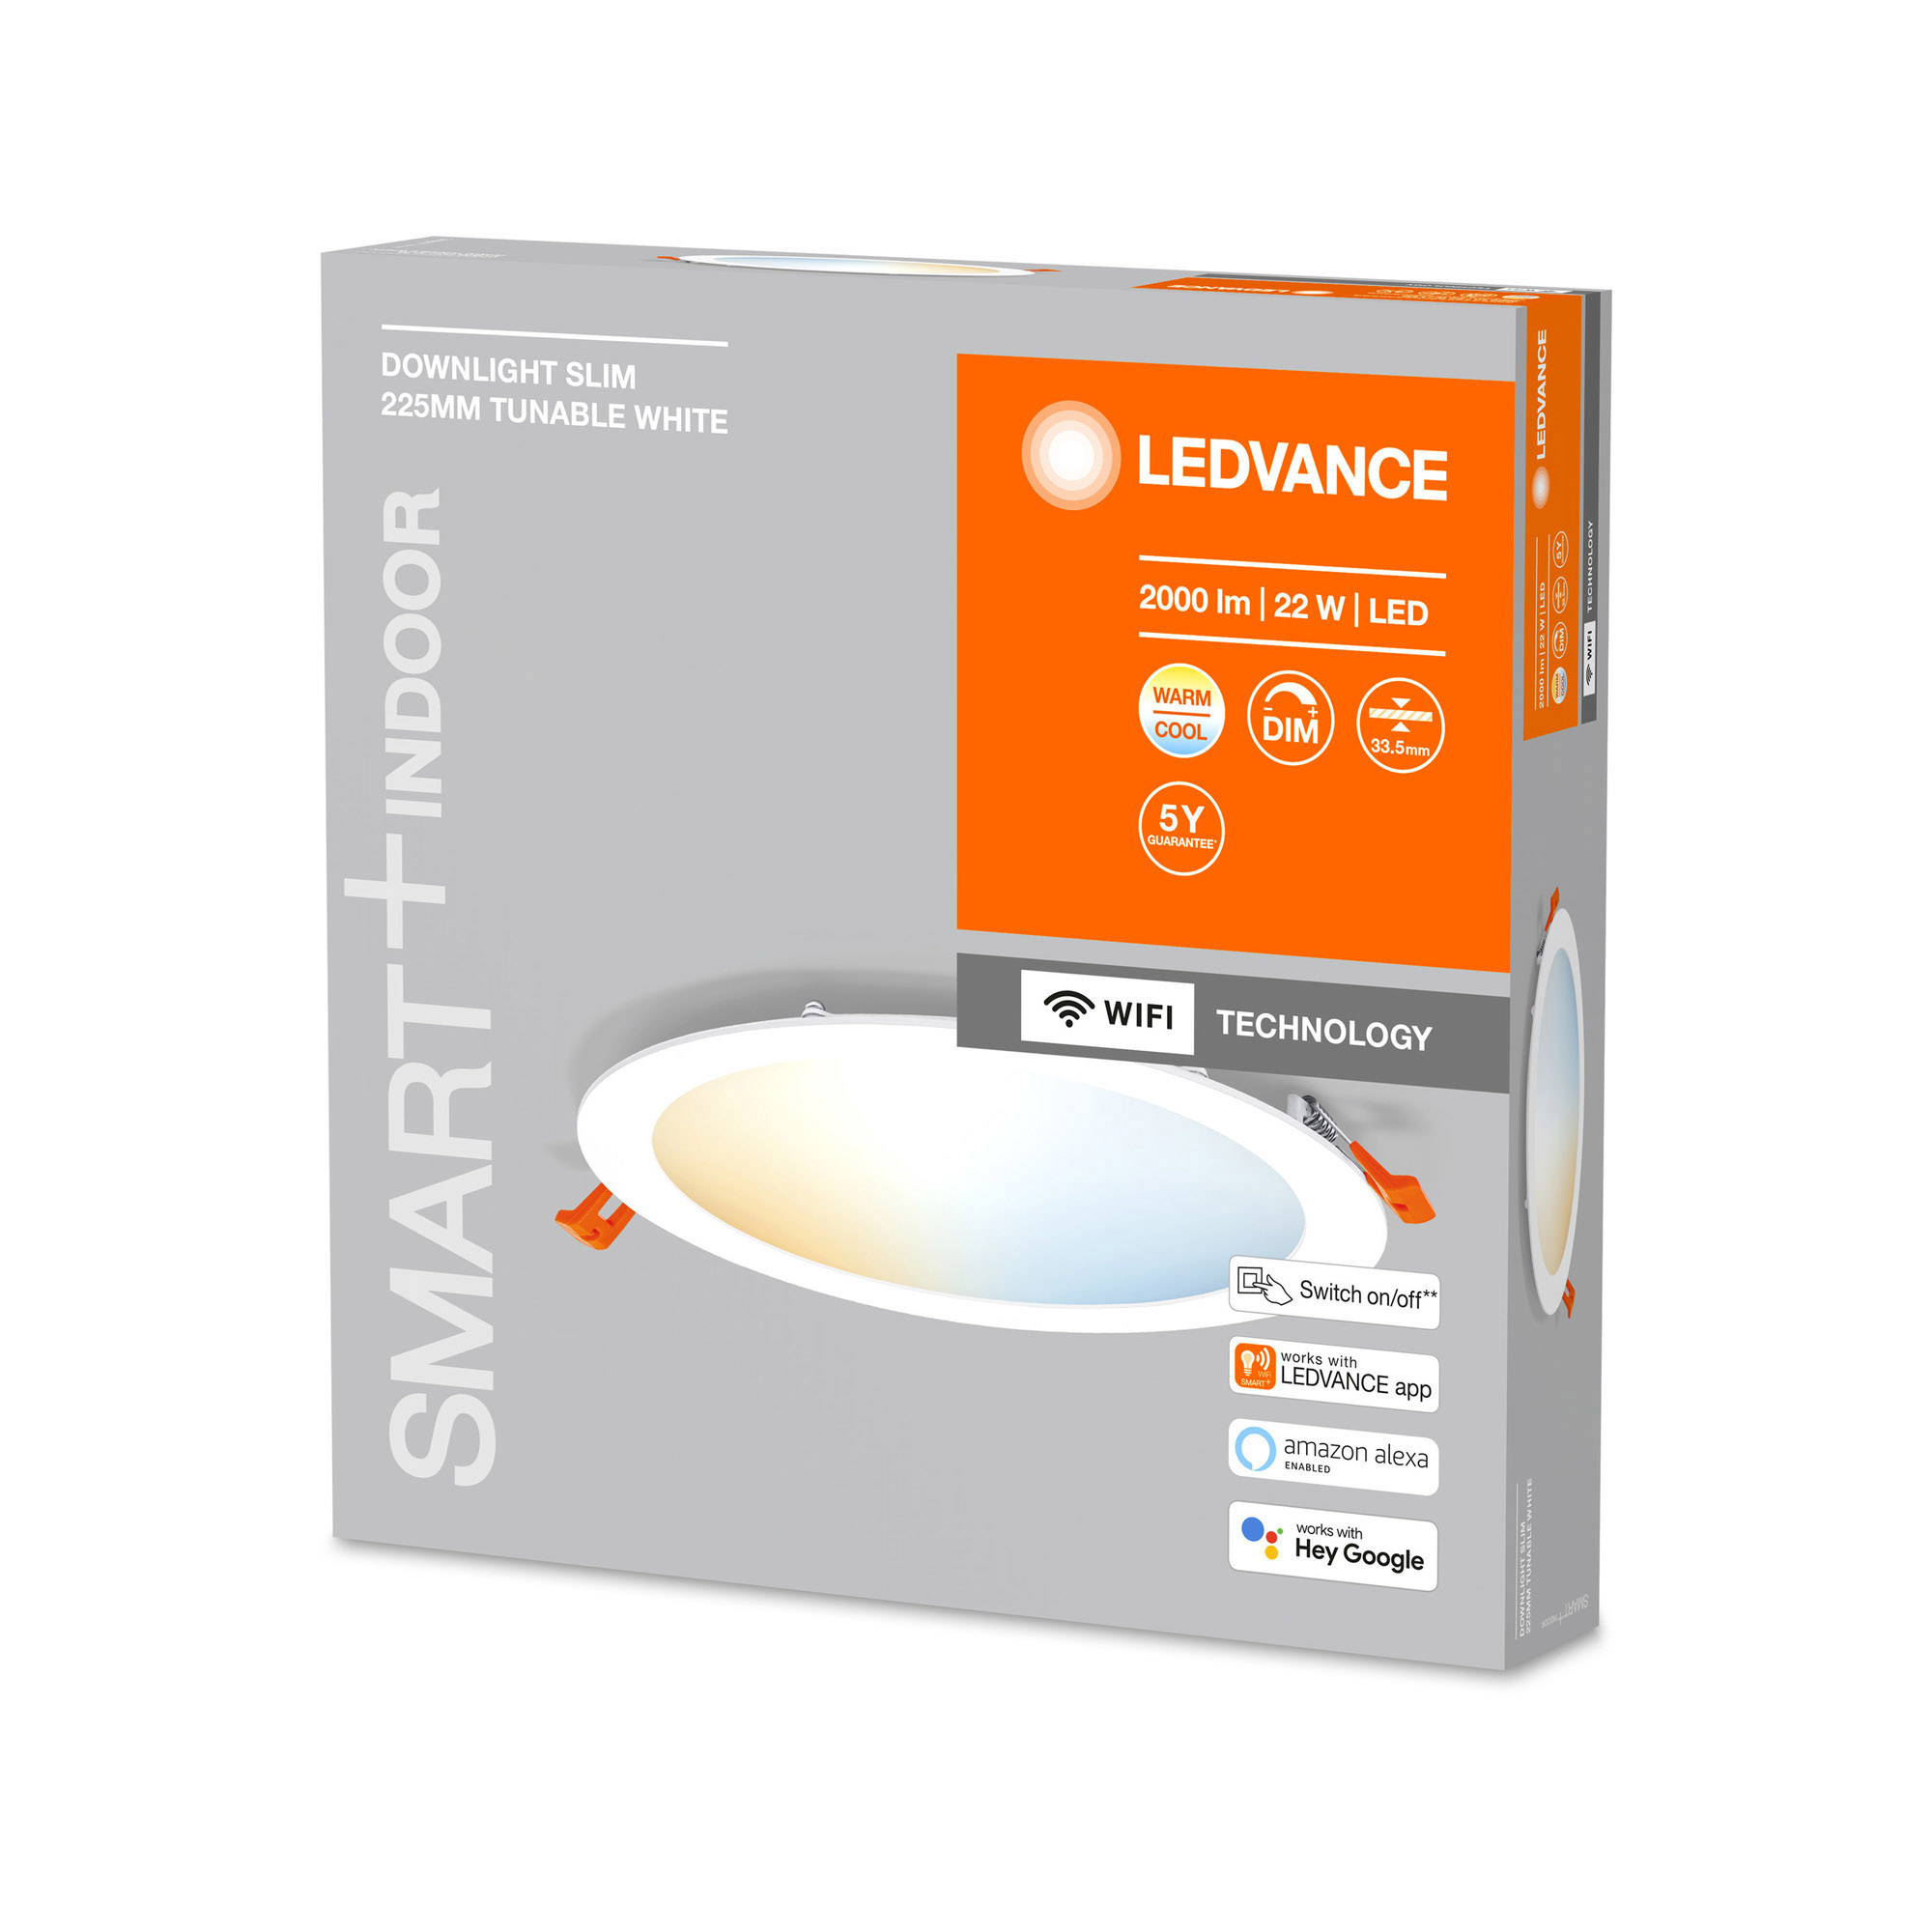 LEDVANCE SMART+ WiFi Tunable White LED Recessed Downlight SLIM 225mm white 2000lm